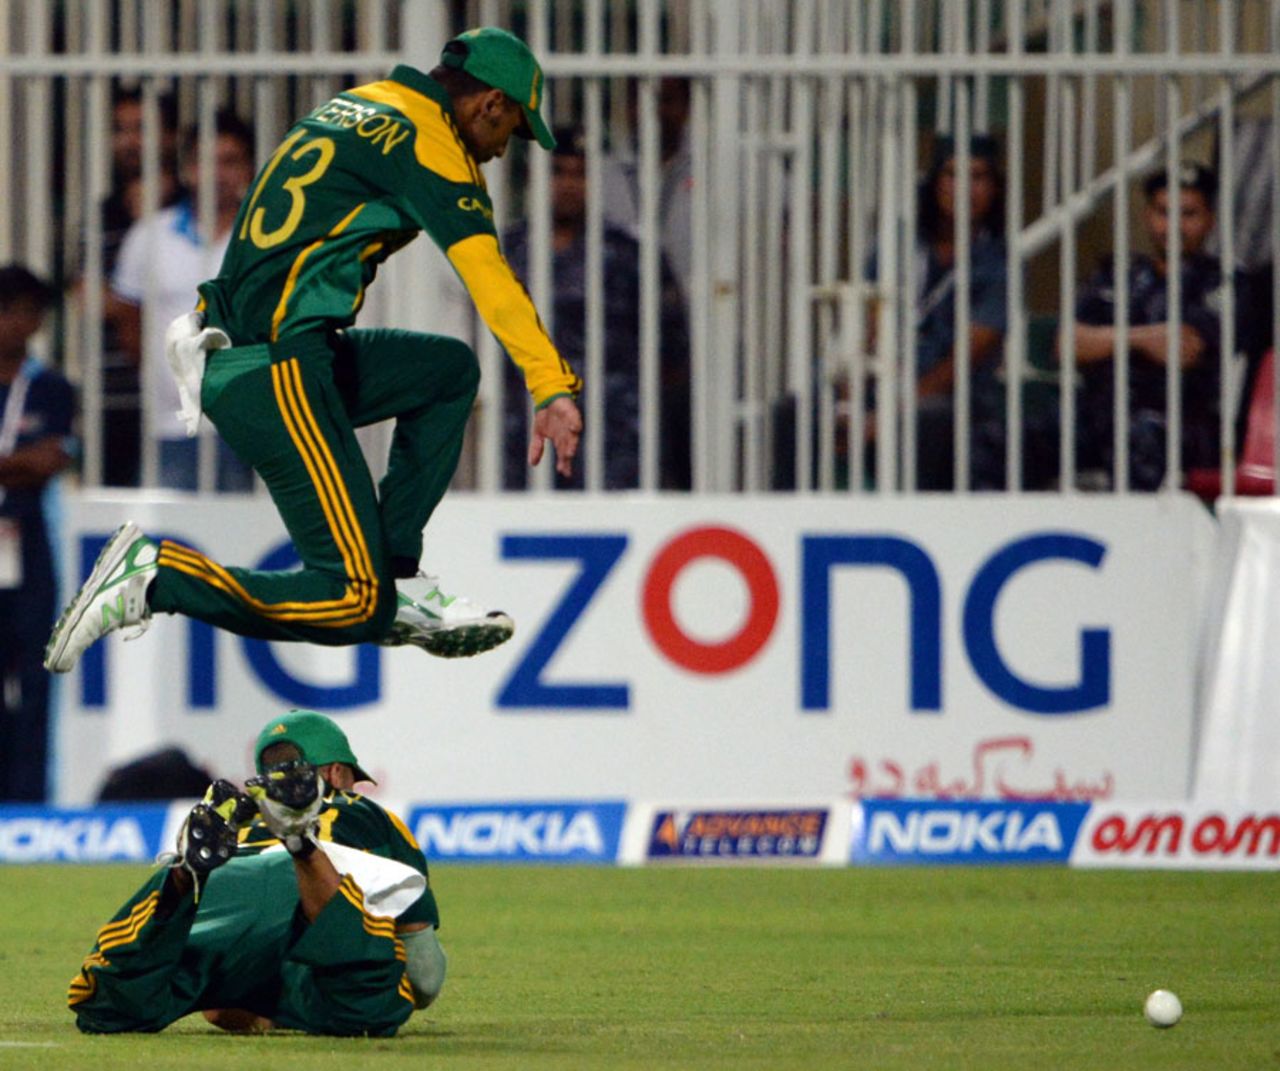 Robin Peterson leaps over a team-mate to stop a ball in the field, Pakistan v South Africa, 5th ODI, Sharjah, November 11, 2013